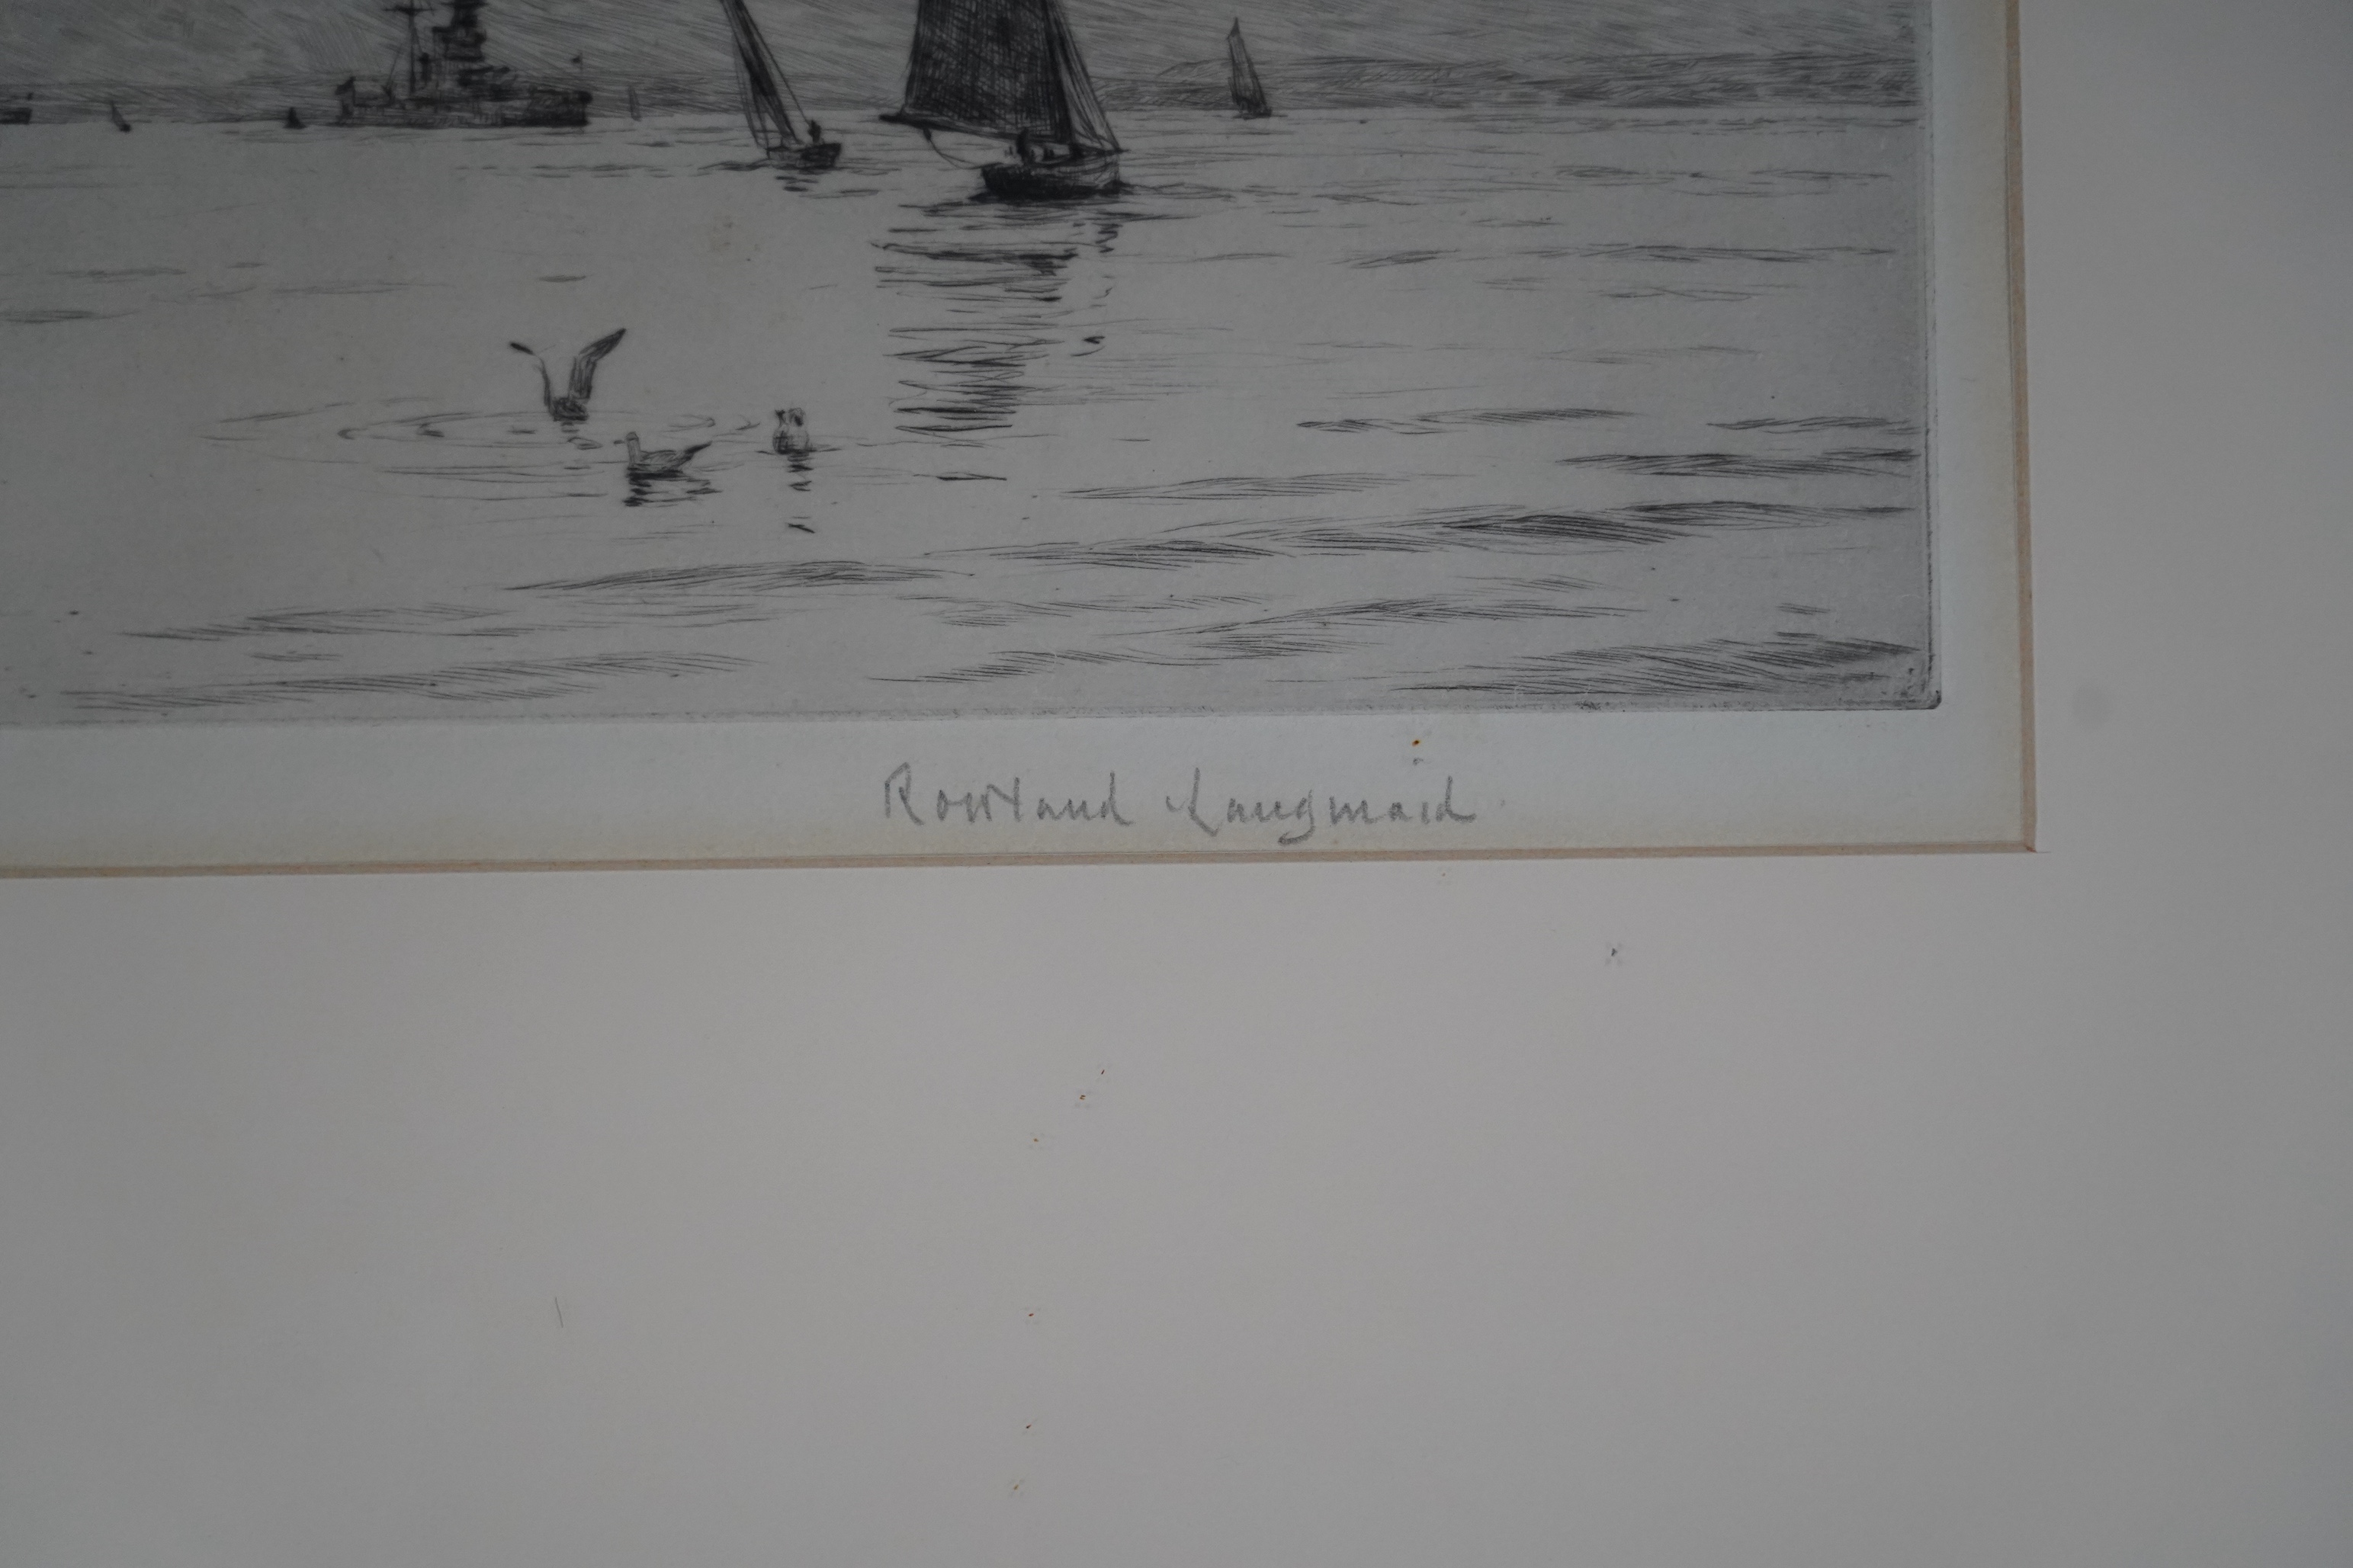 Rowland Langmaid (1897-1956), etching, 'Spithead', signed in pencil, academy proof blindstamped, 18 x 36cm